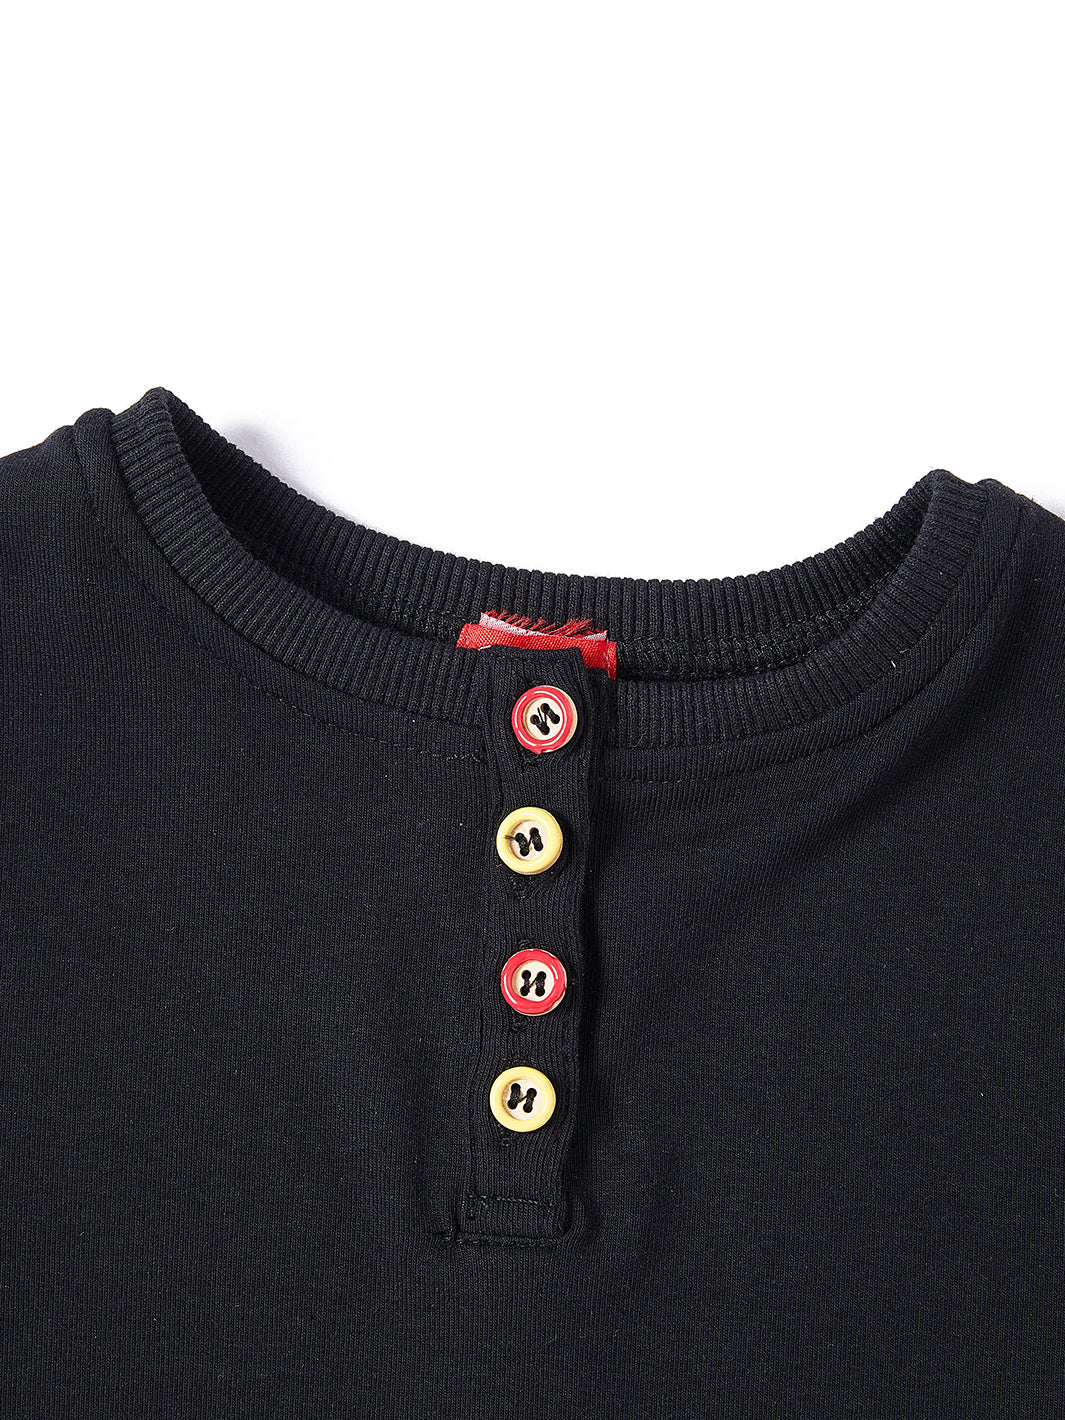 Colored Buttons T-shirt - Black